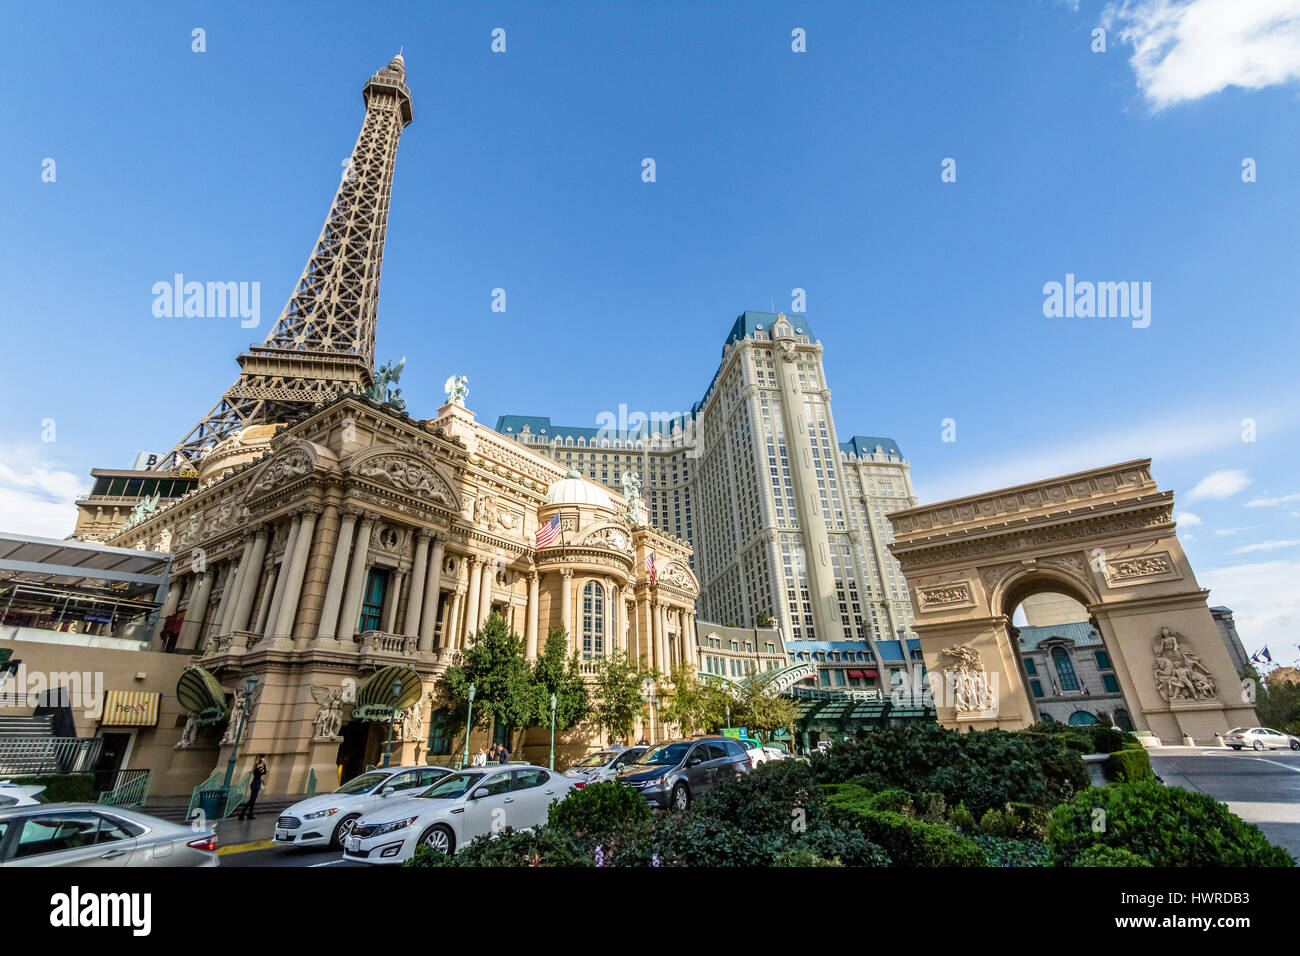 LAS VEGAS - FEB 04 : The Interior Of Paris Hotel And Casino On February 04  2015 In Las Vegas, Nevada, The Paris Hotel Opened In 1999 And Features A  Replica Of